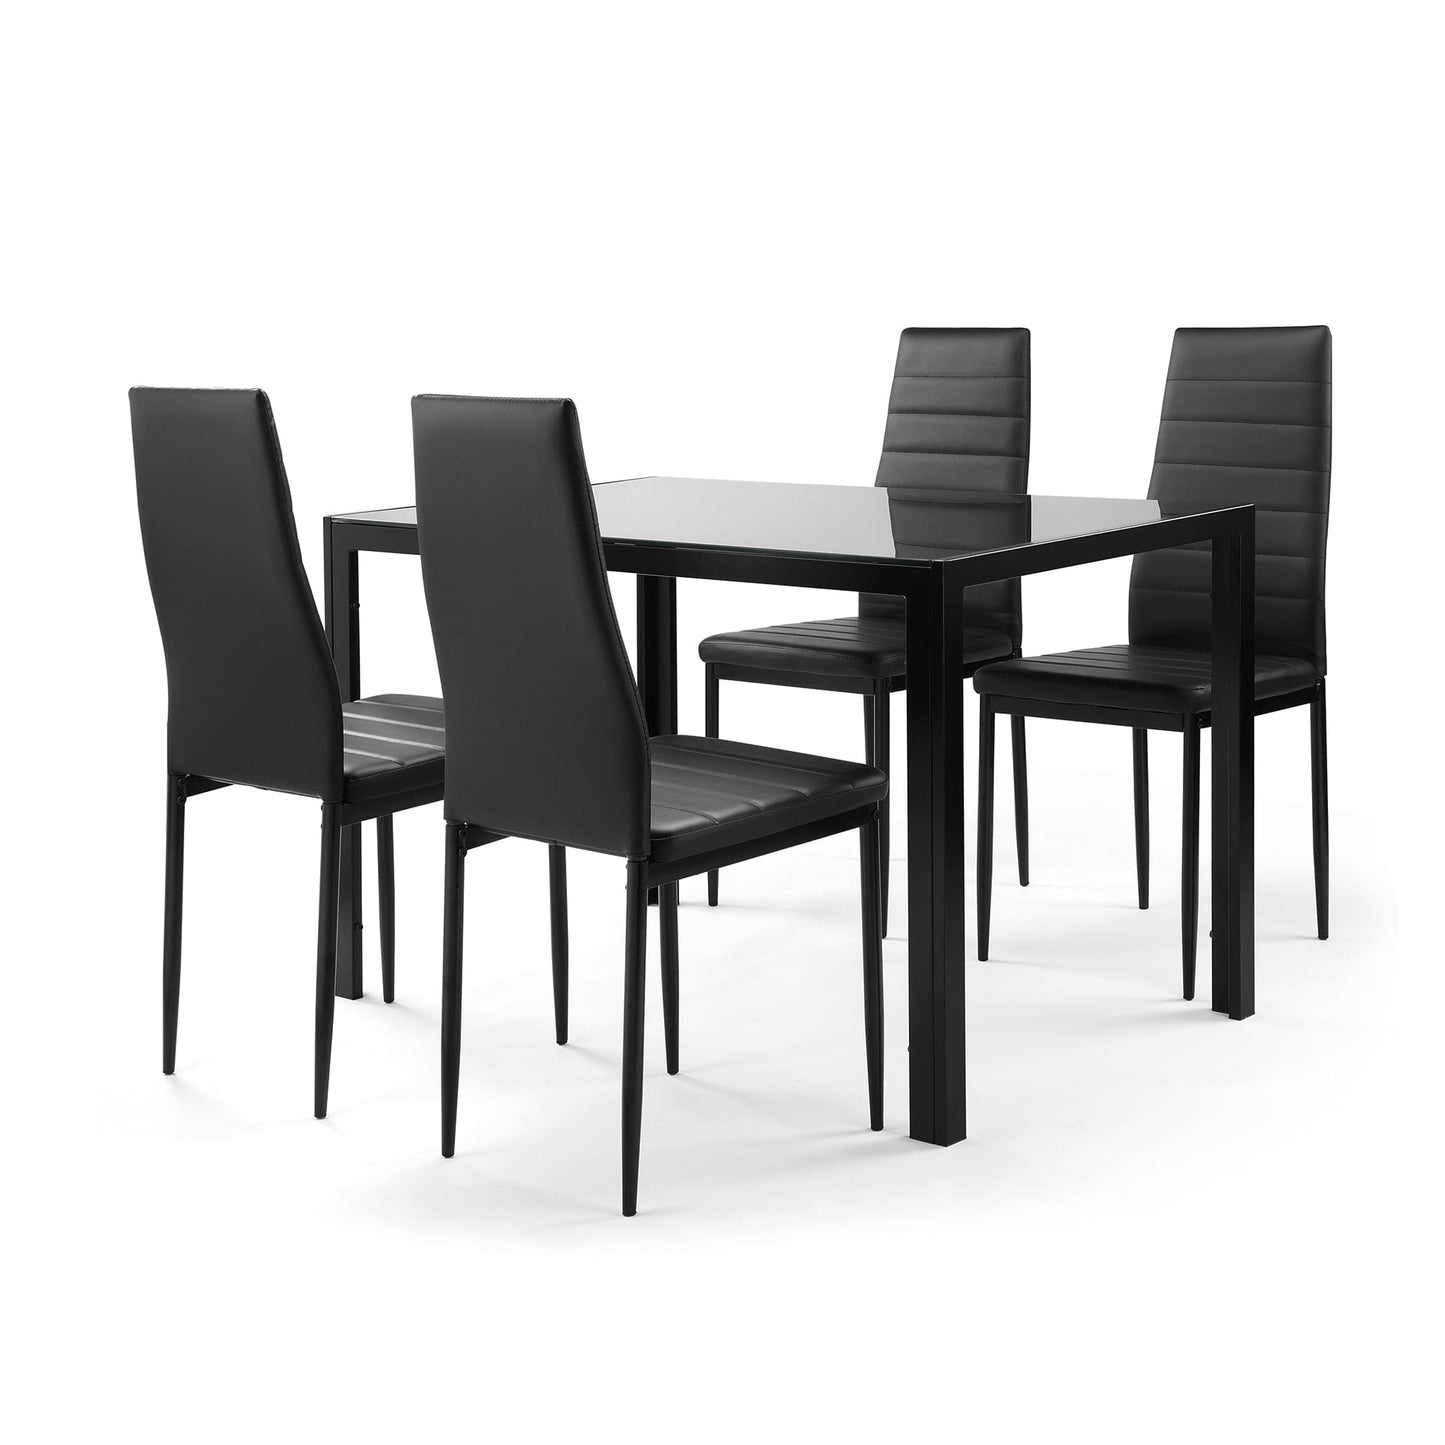 1st Choice Furniture Direct Dining Room Sets 1st Choice Contemporary Dining Room Set with Glass Table & Chairs